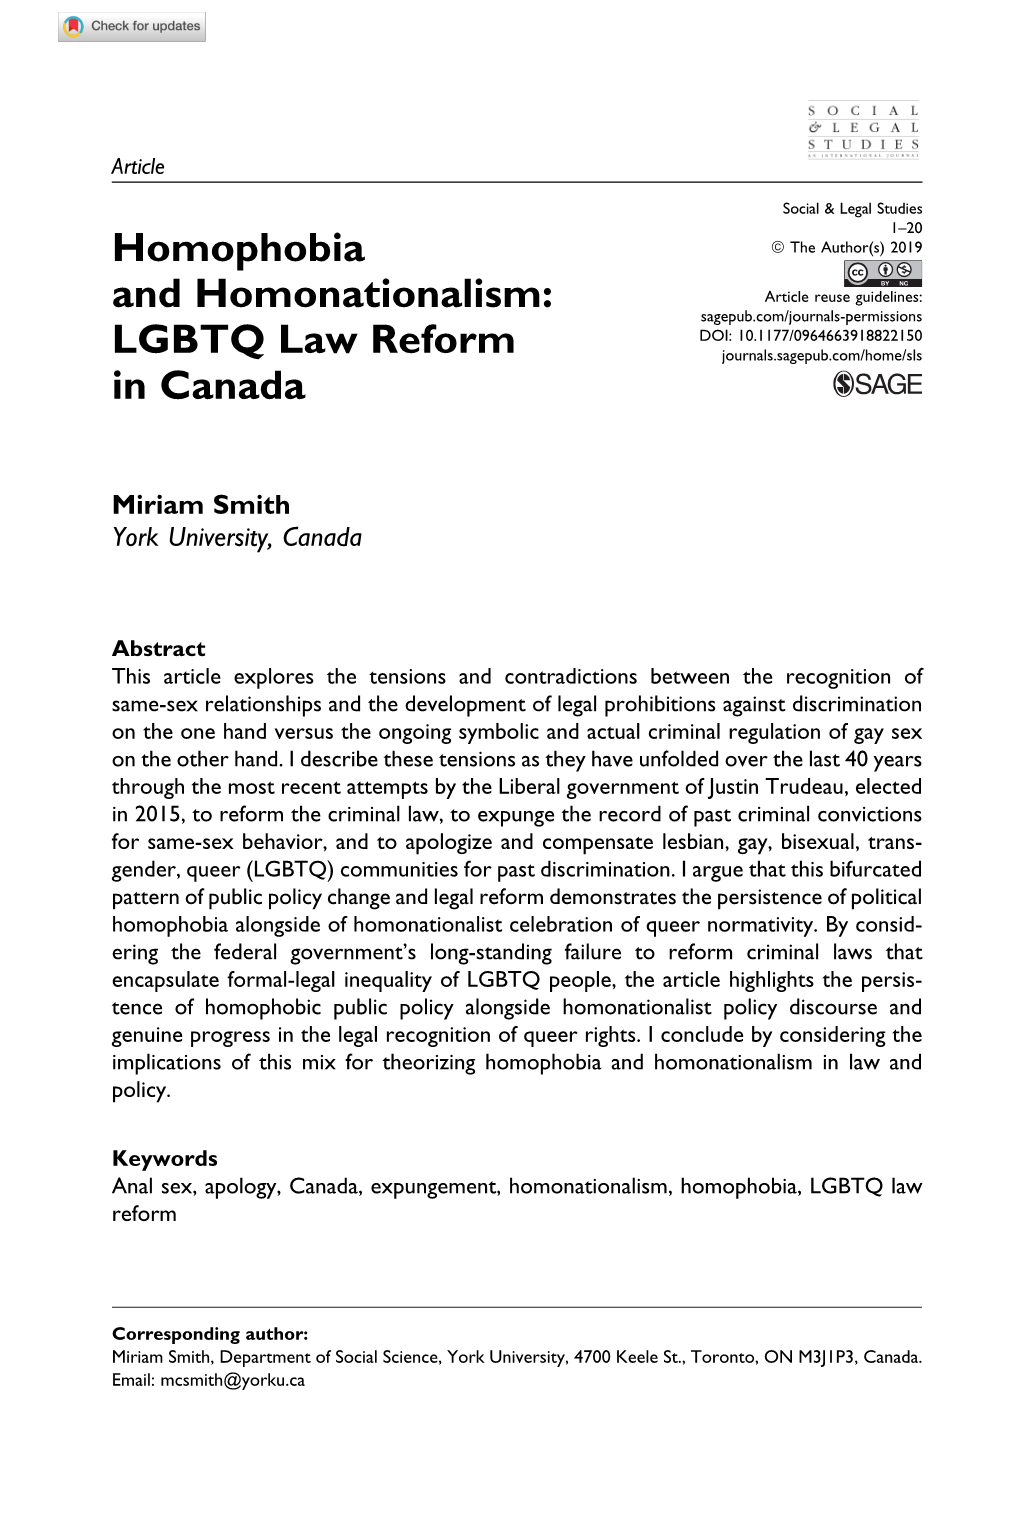 Homophobia and Homonationalism in Law and Policy